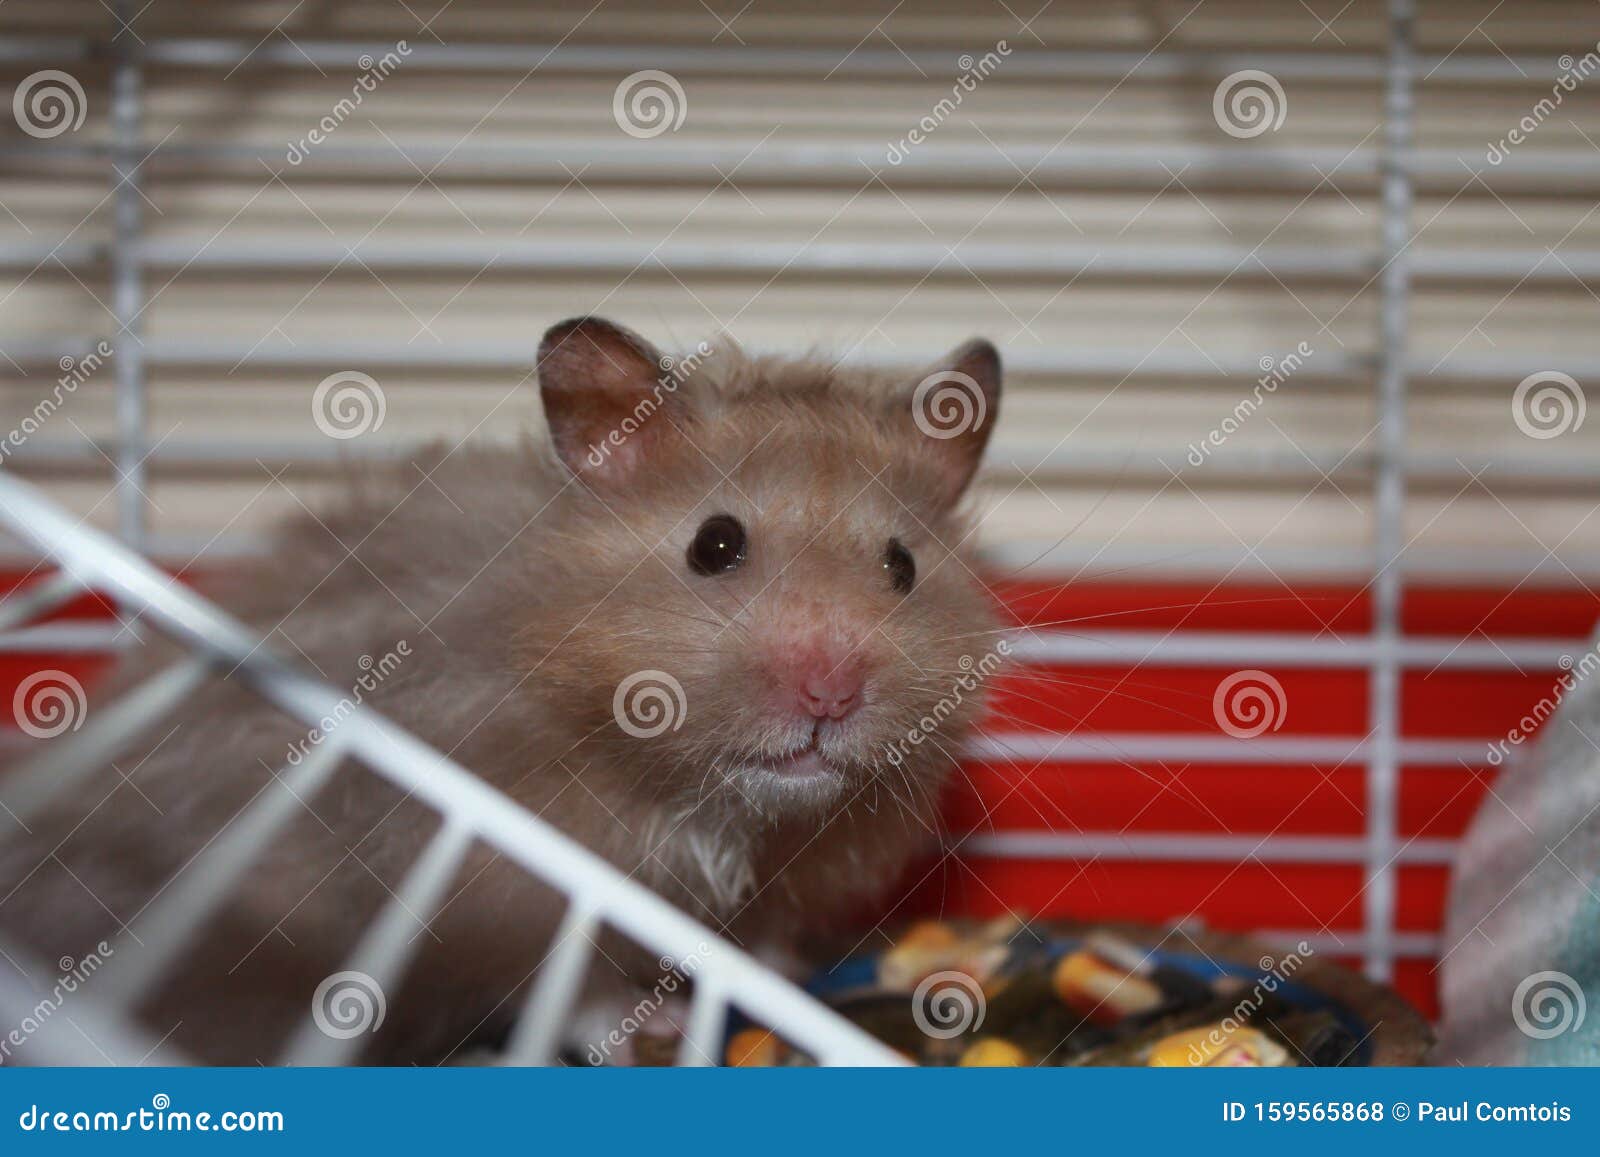 Close-up view of a Teddy Bear hamster showcasing its long, silky fur